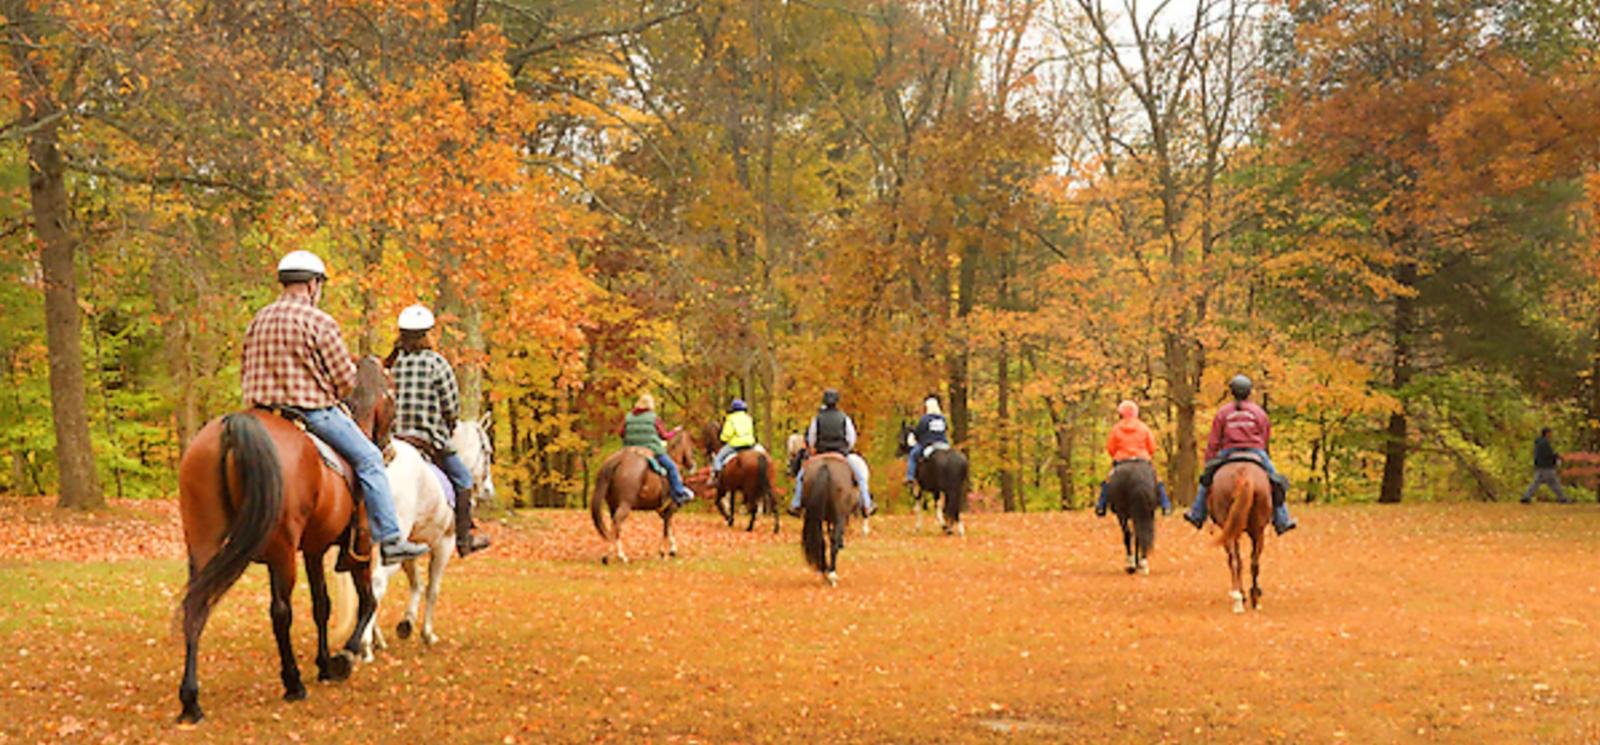 People riding horses into the woods in fall (Flickr@terrywildstock)